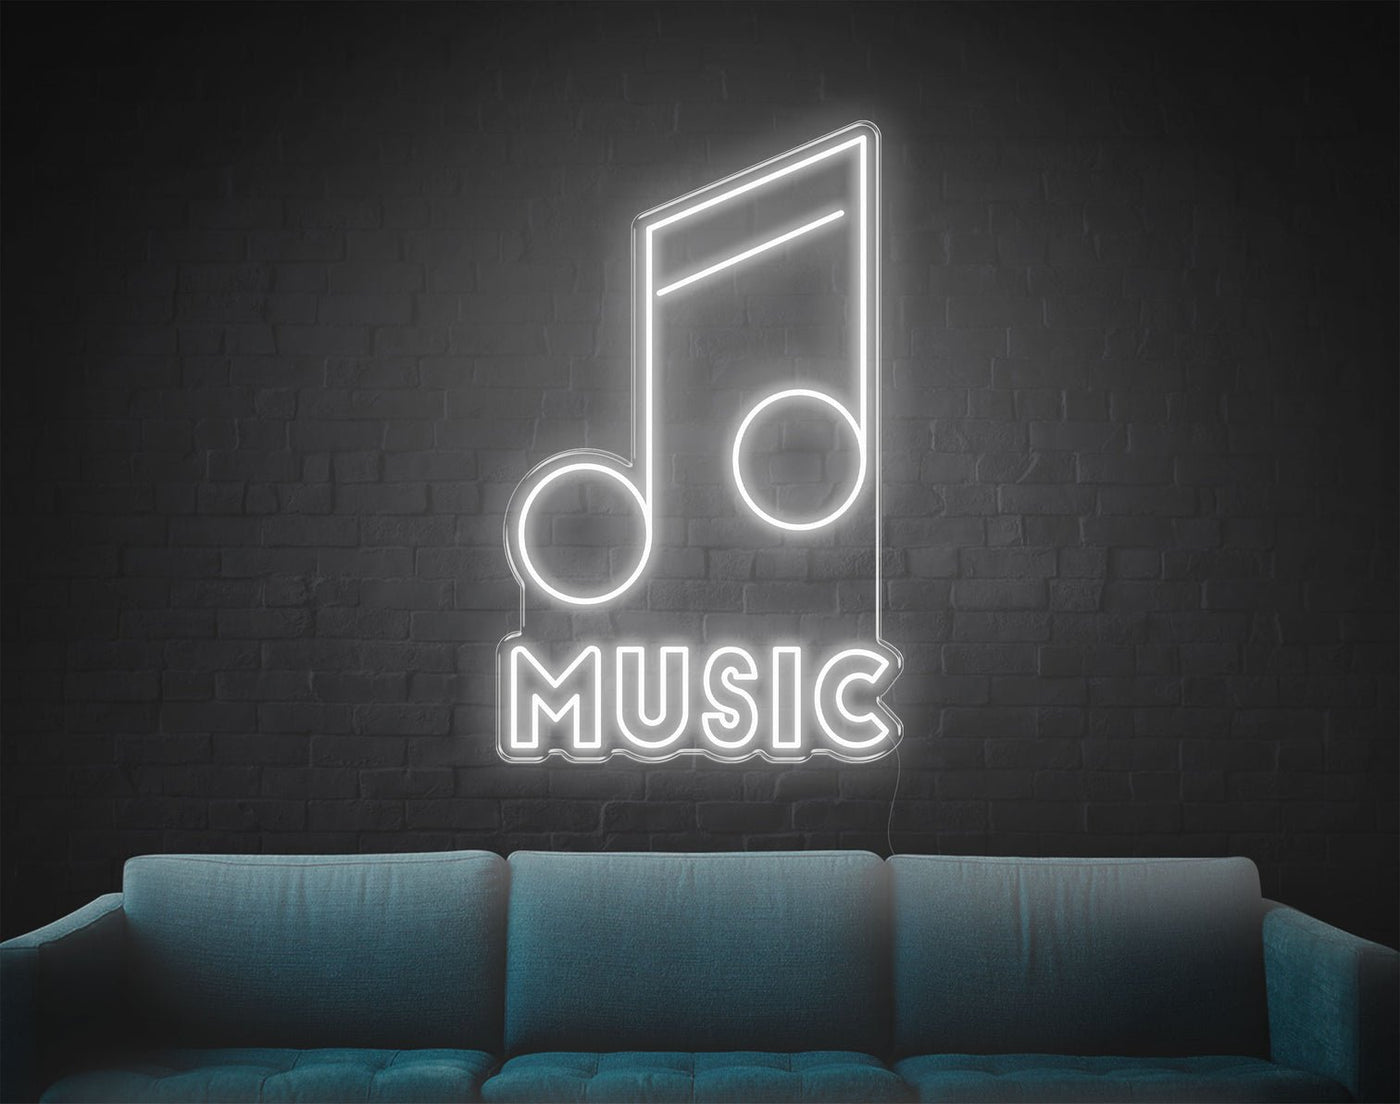 Music V1 LED Neon Sign - 14inch x 9inchHot Pink